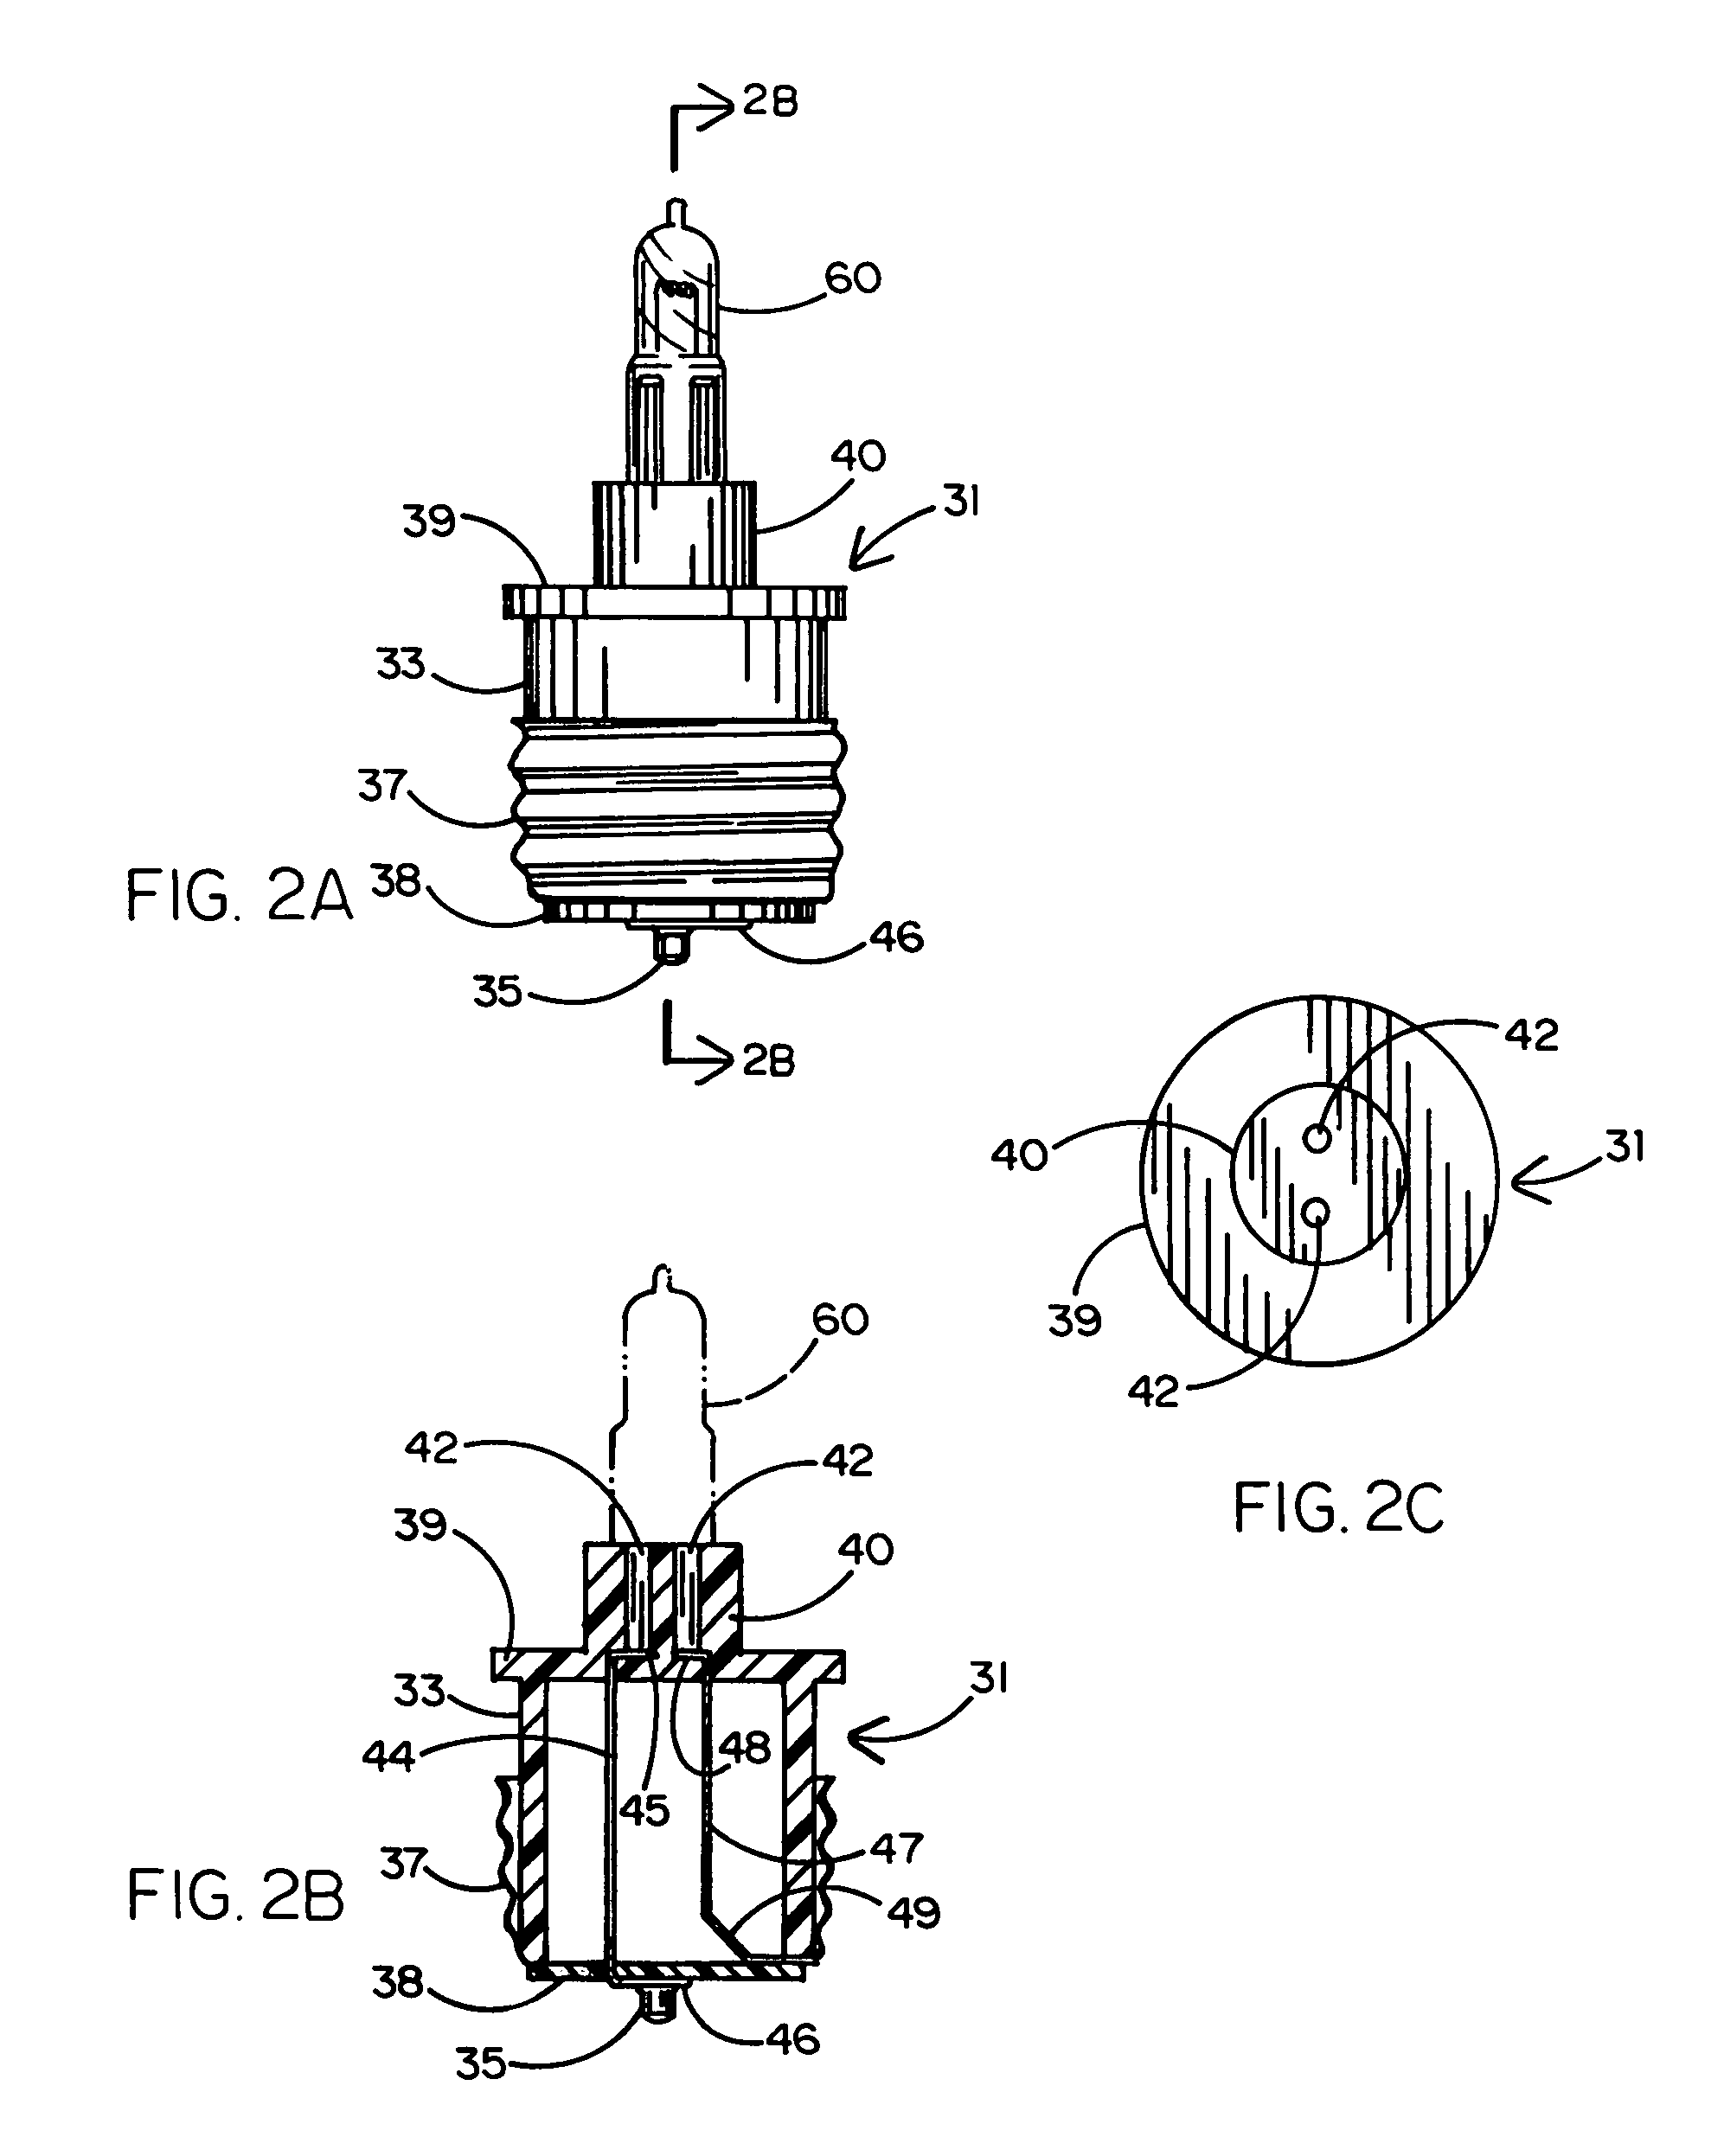 Adapter for connecting a low voltage light bulb to a standard electrical light socket